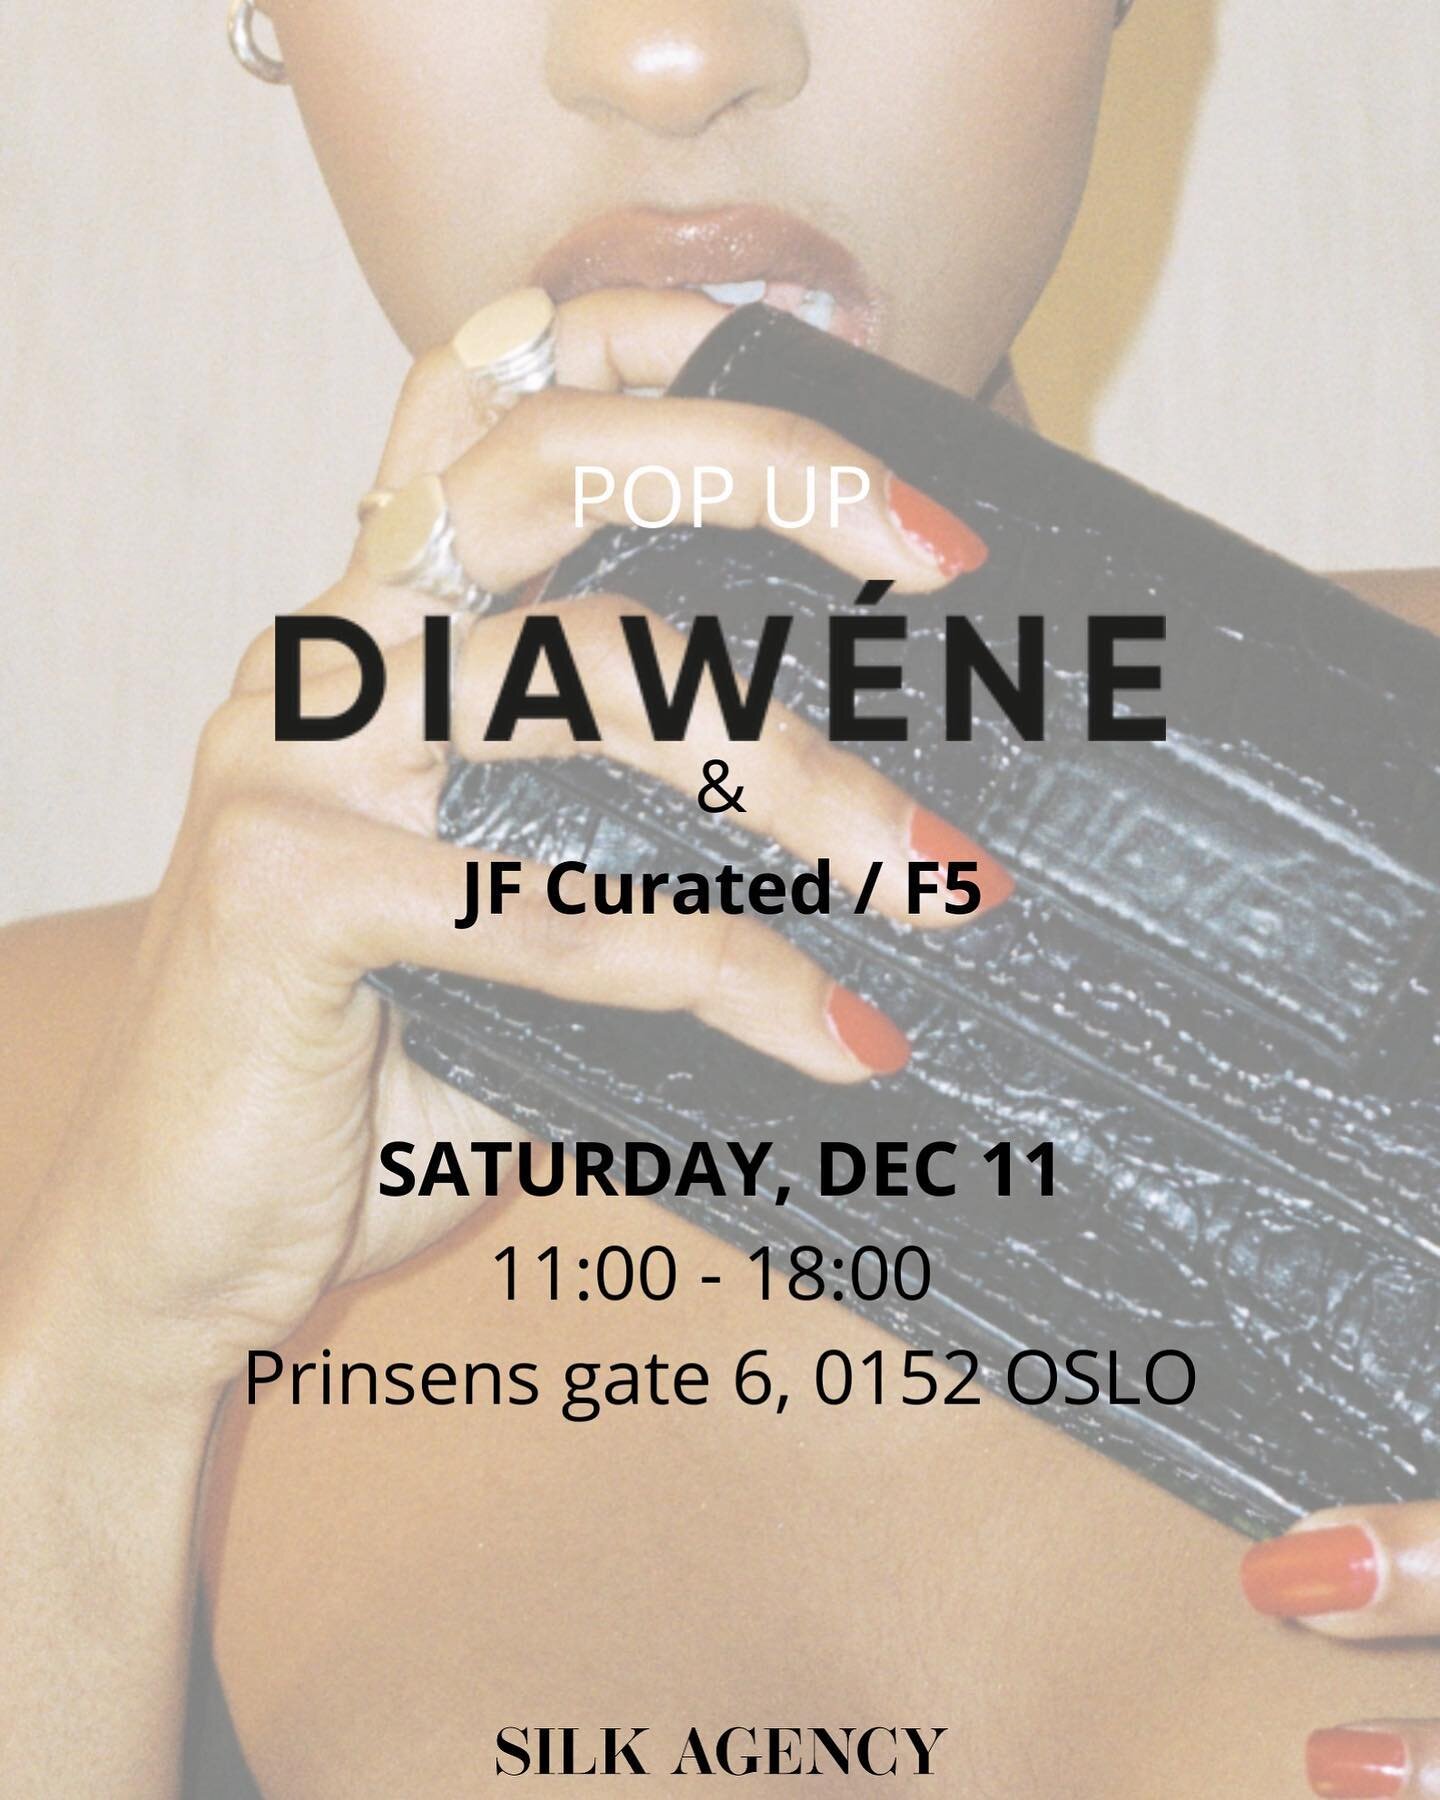 Announcement; 
Saturday December 11th we are celebrating DIAWENE&rsquo;s 3rd year of excistence with a POP-UP in collaboration with @jfcurated ! The store will be open from 11-18, there will be served breakfast and coffee in the morning ☕️ Throughout